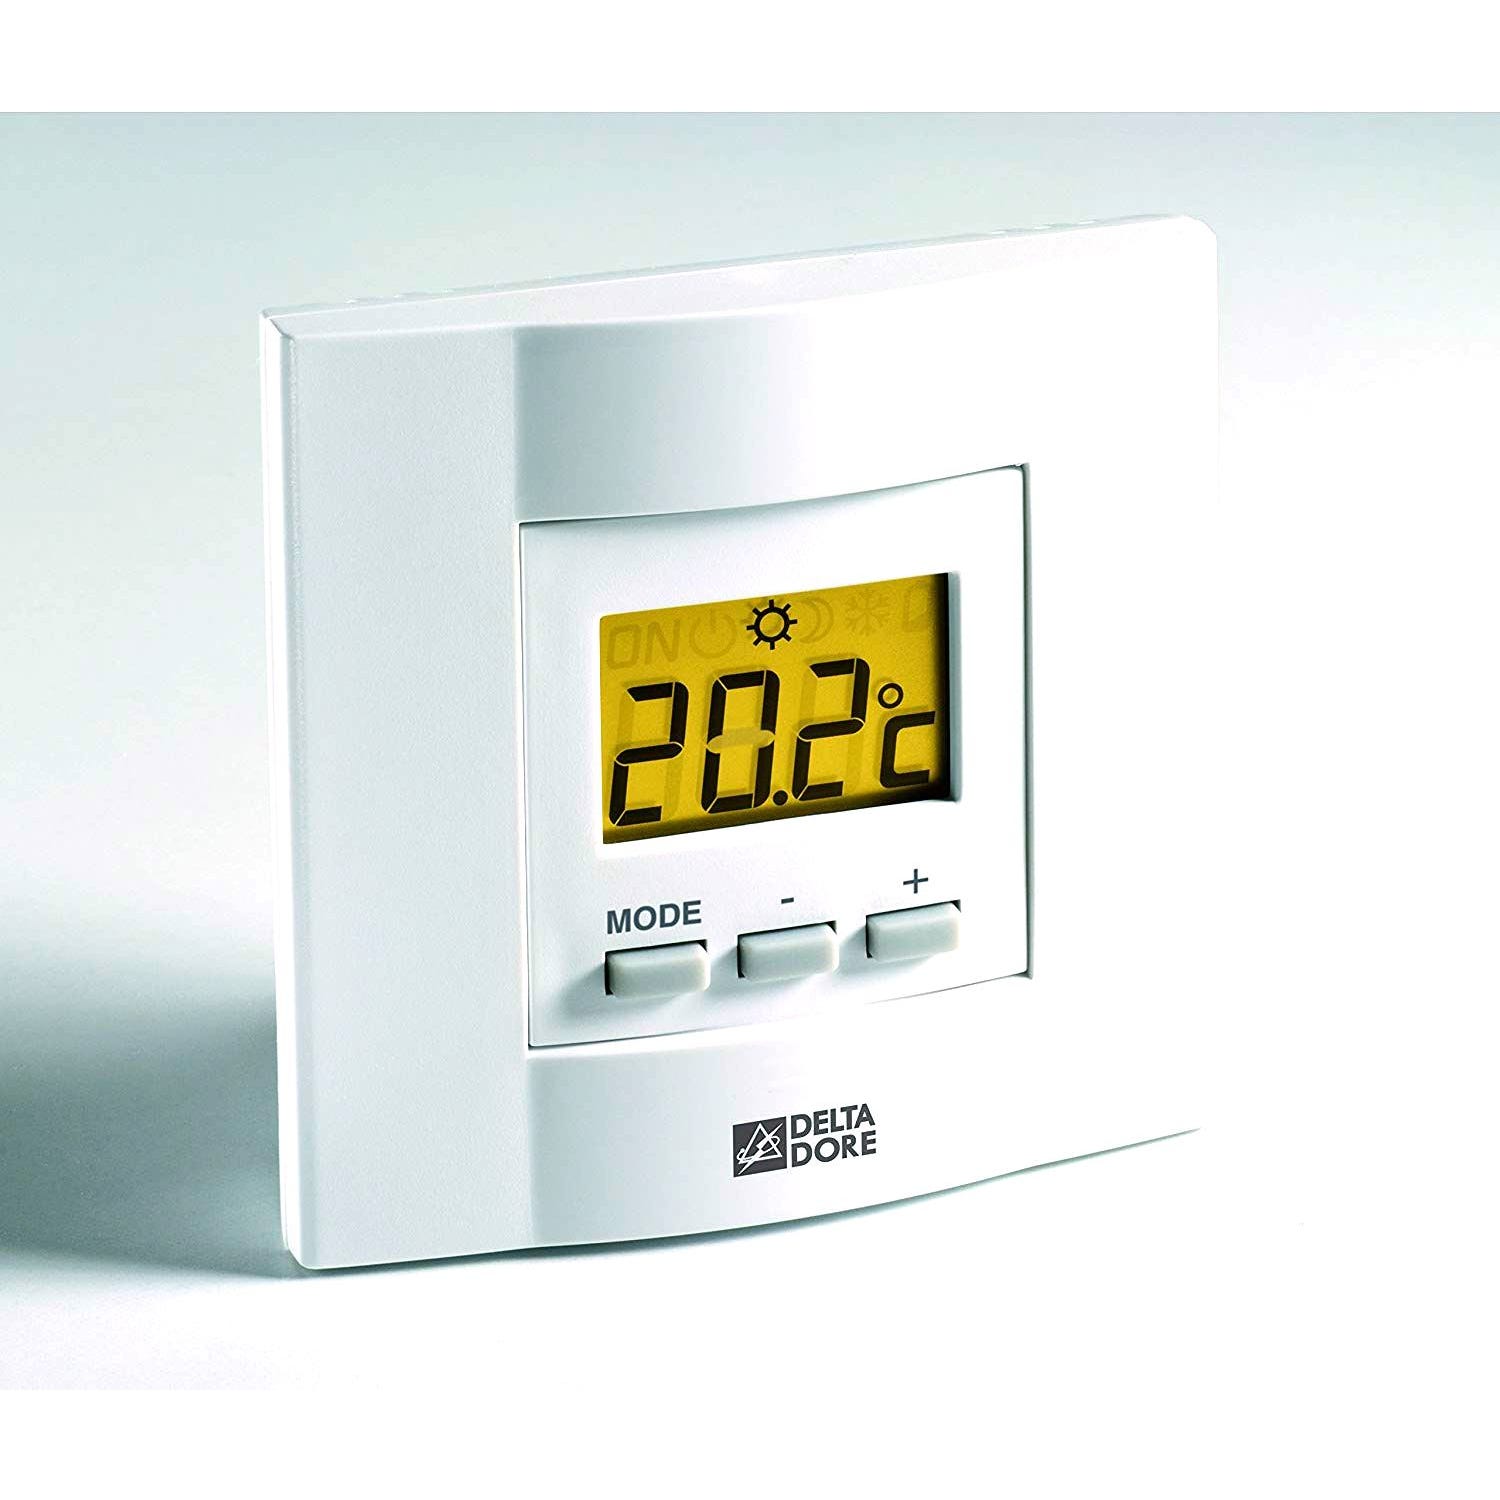 Thermostat d'ambiance à touches TYBOX 21 DELTA DORE 2